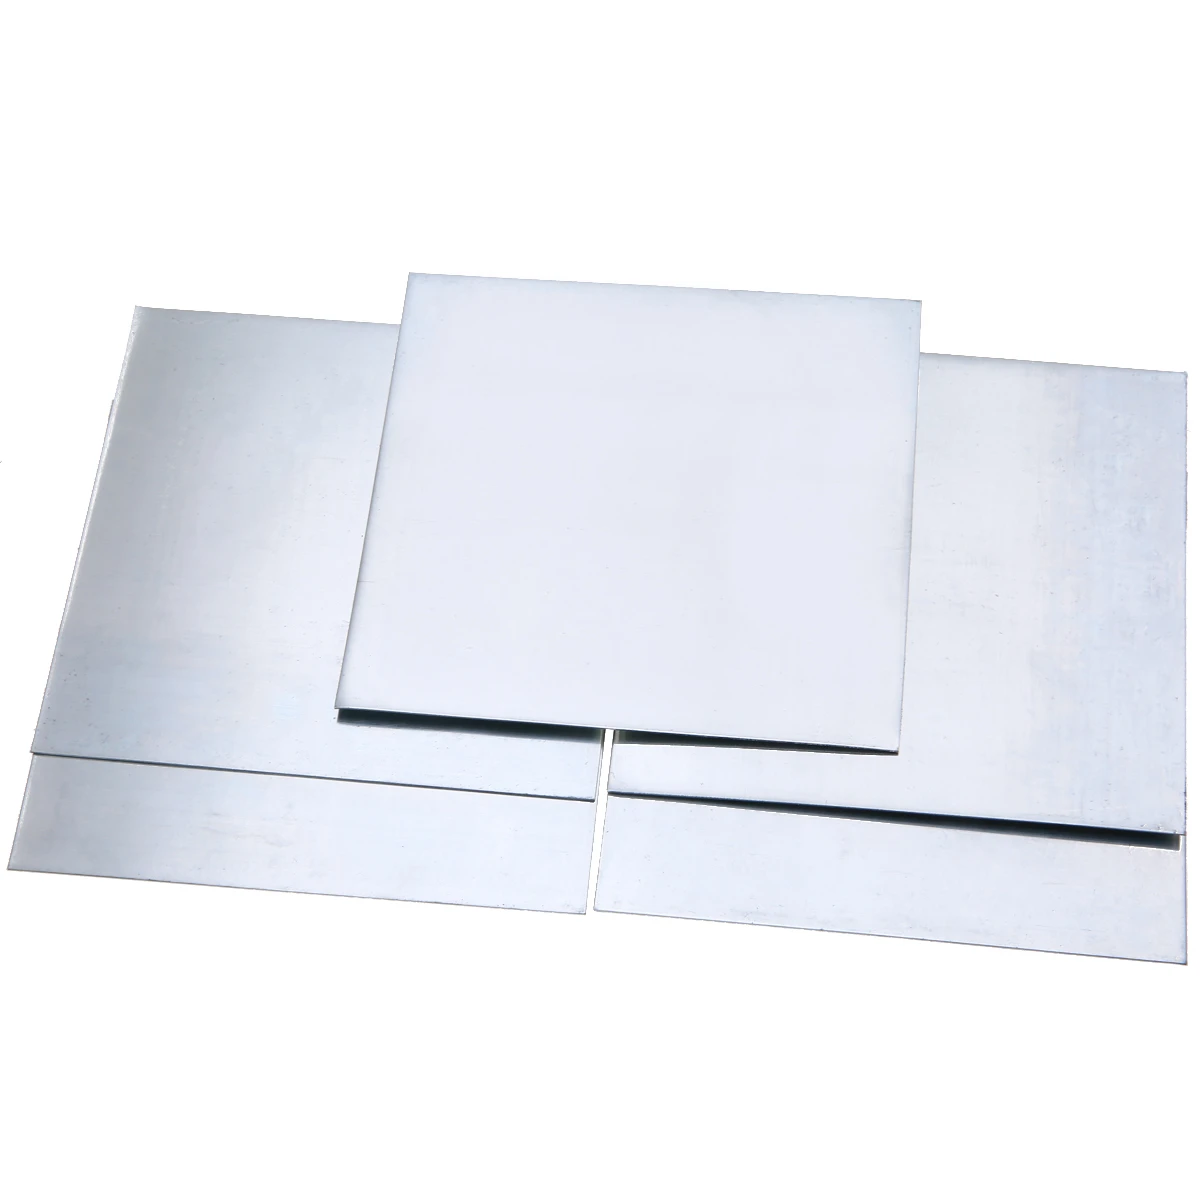 5pcs High-purity Pure Zinc Zn Sheet Plate 0.5mm Thickness Metal Foil 100mmx100mm For Power Tools